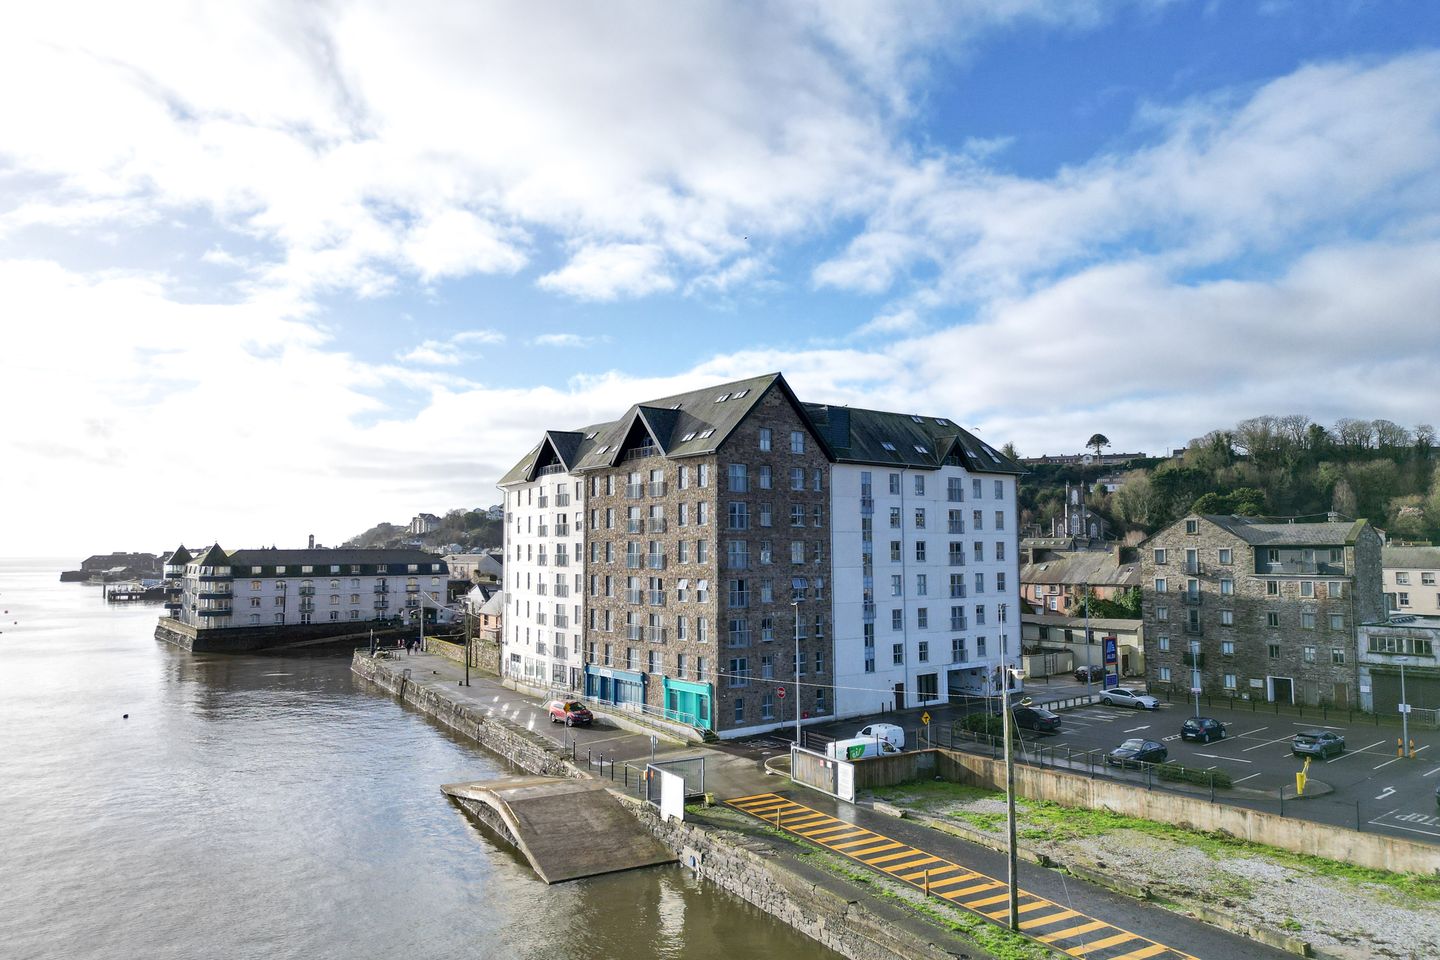 204 Pier Head Apartments, Store Street, Youghal, Co. Cork, P36A379